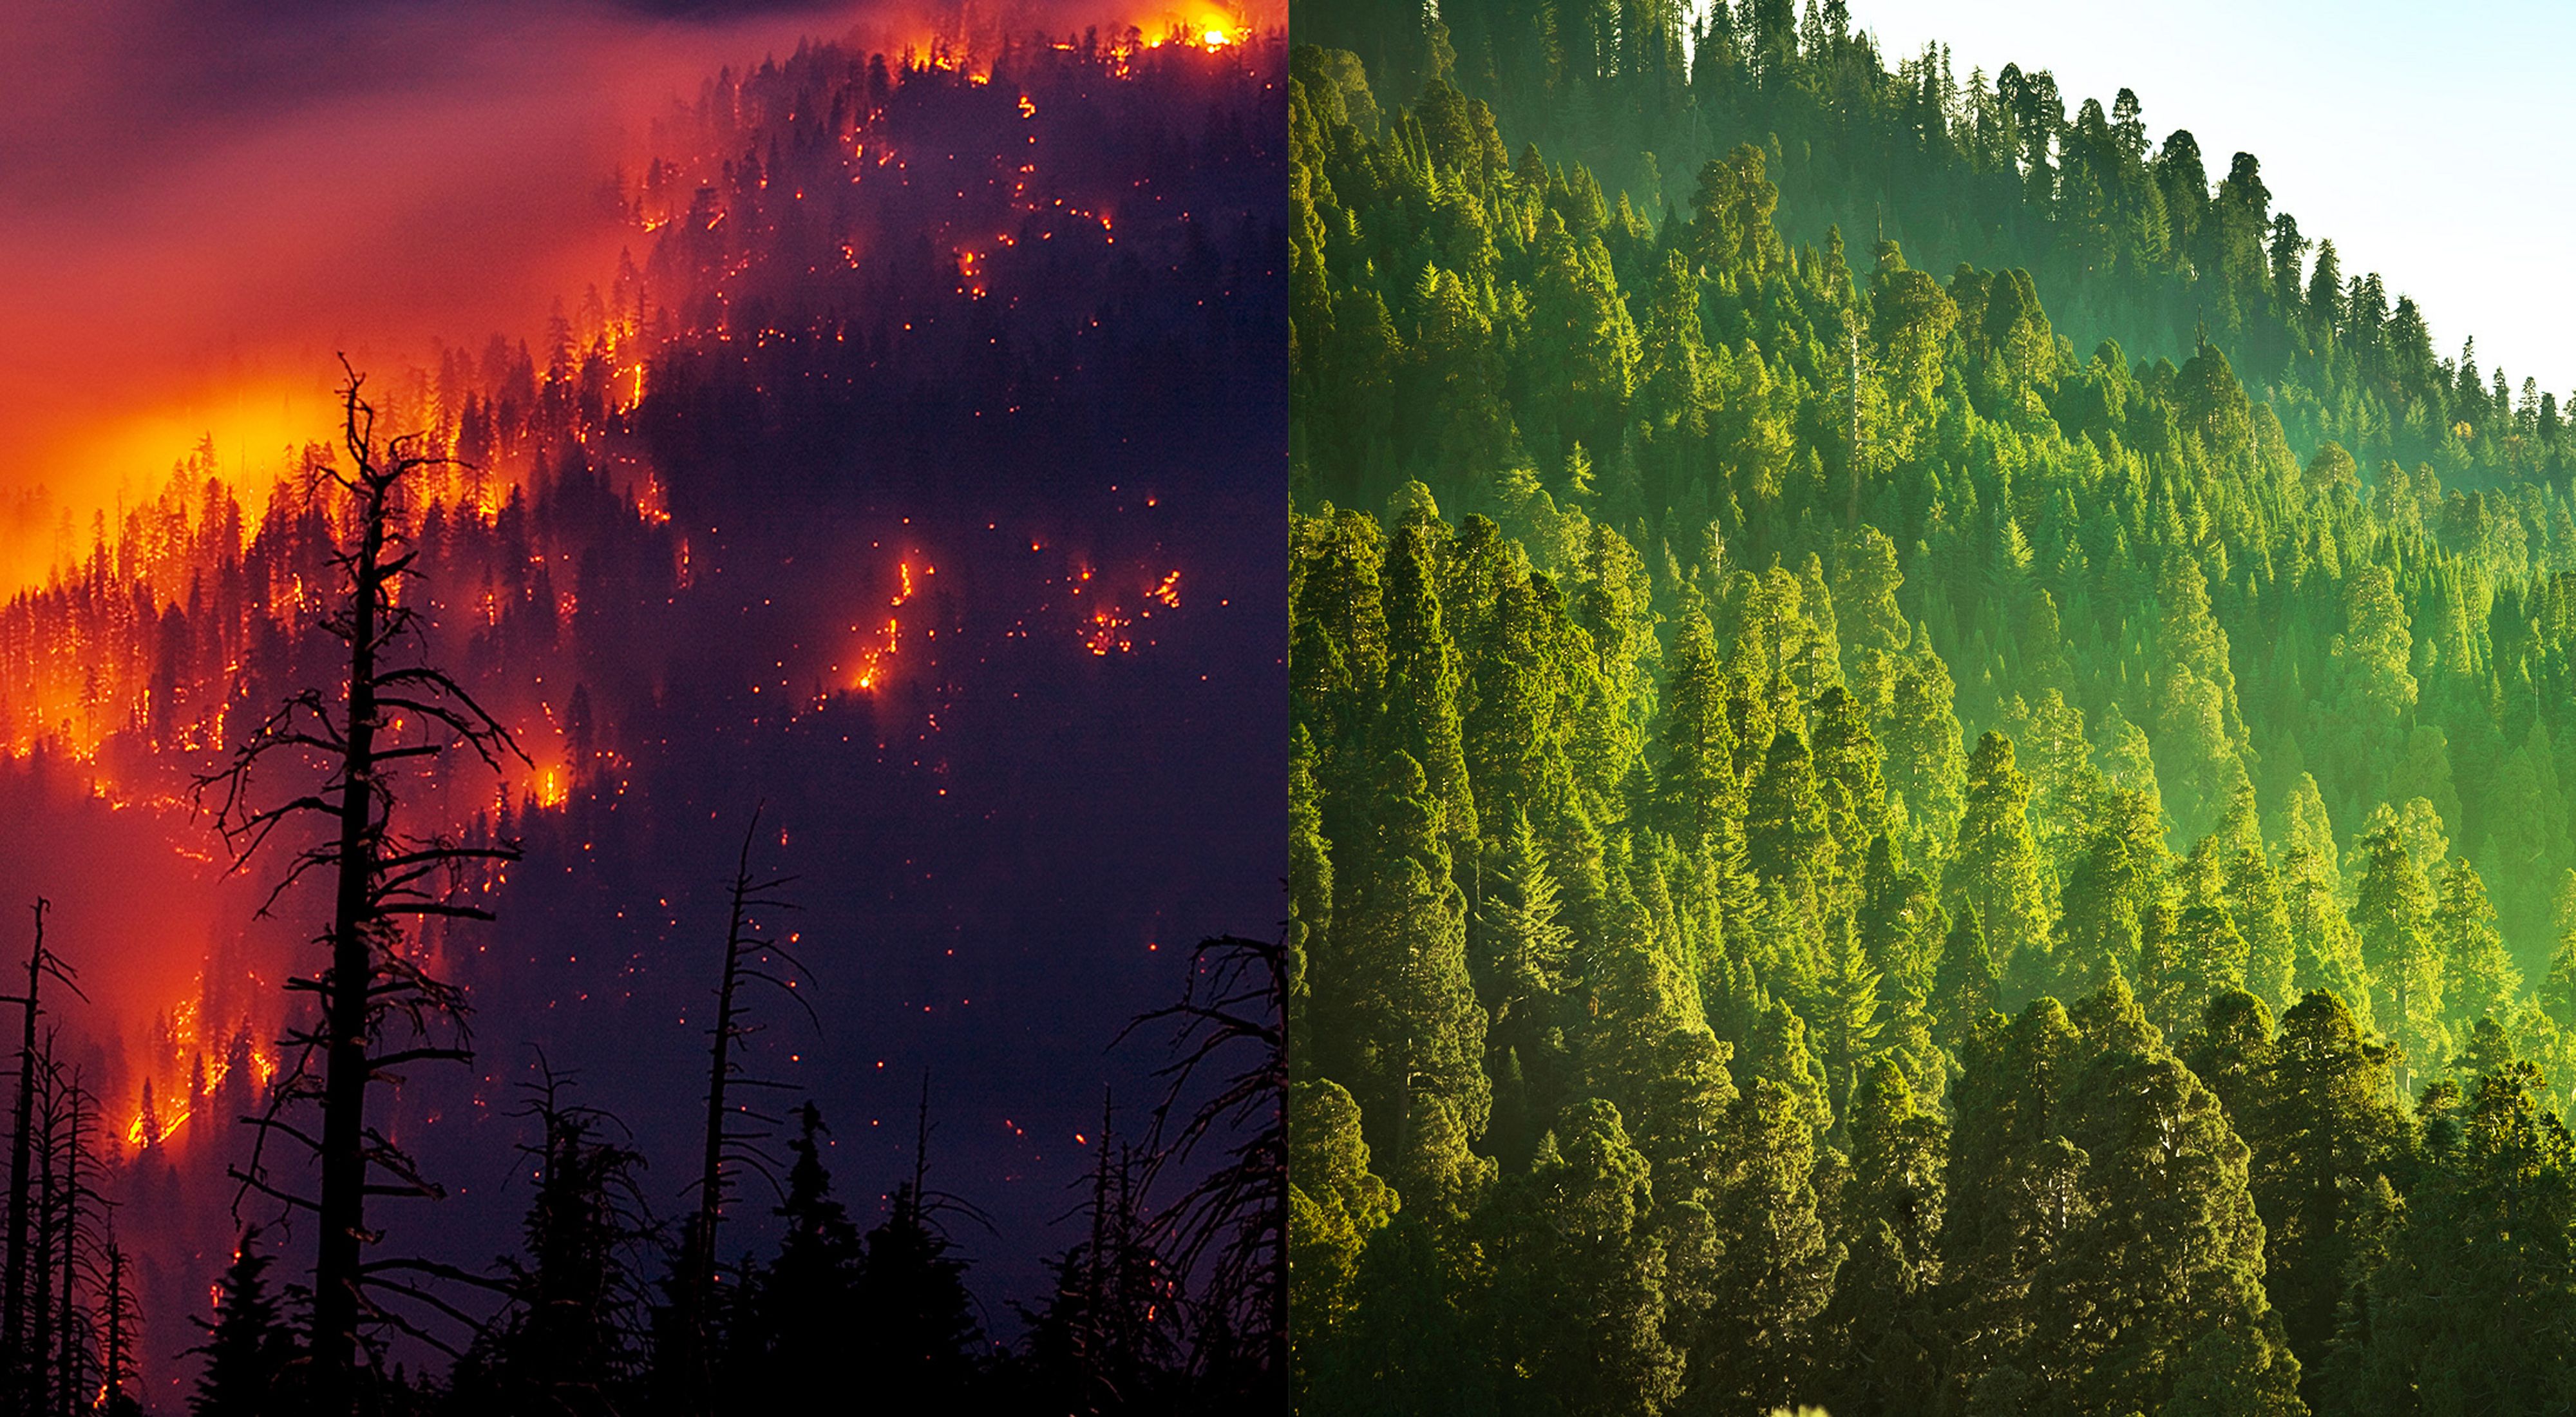 Two Futures. One Choice. image with fire vs a healthy forest.